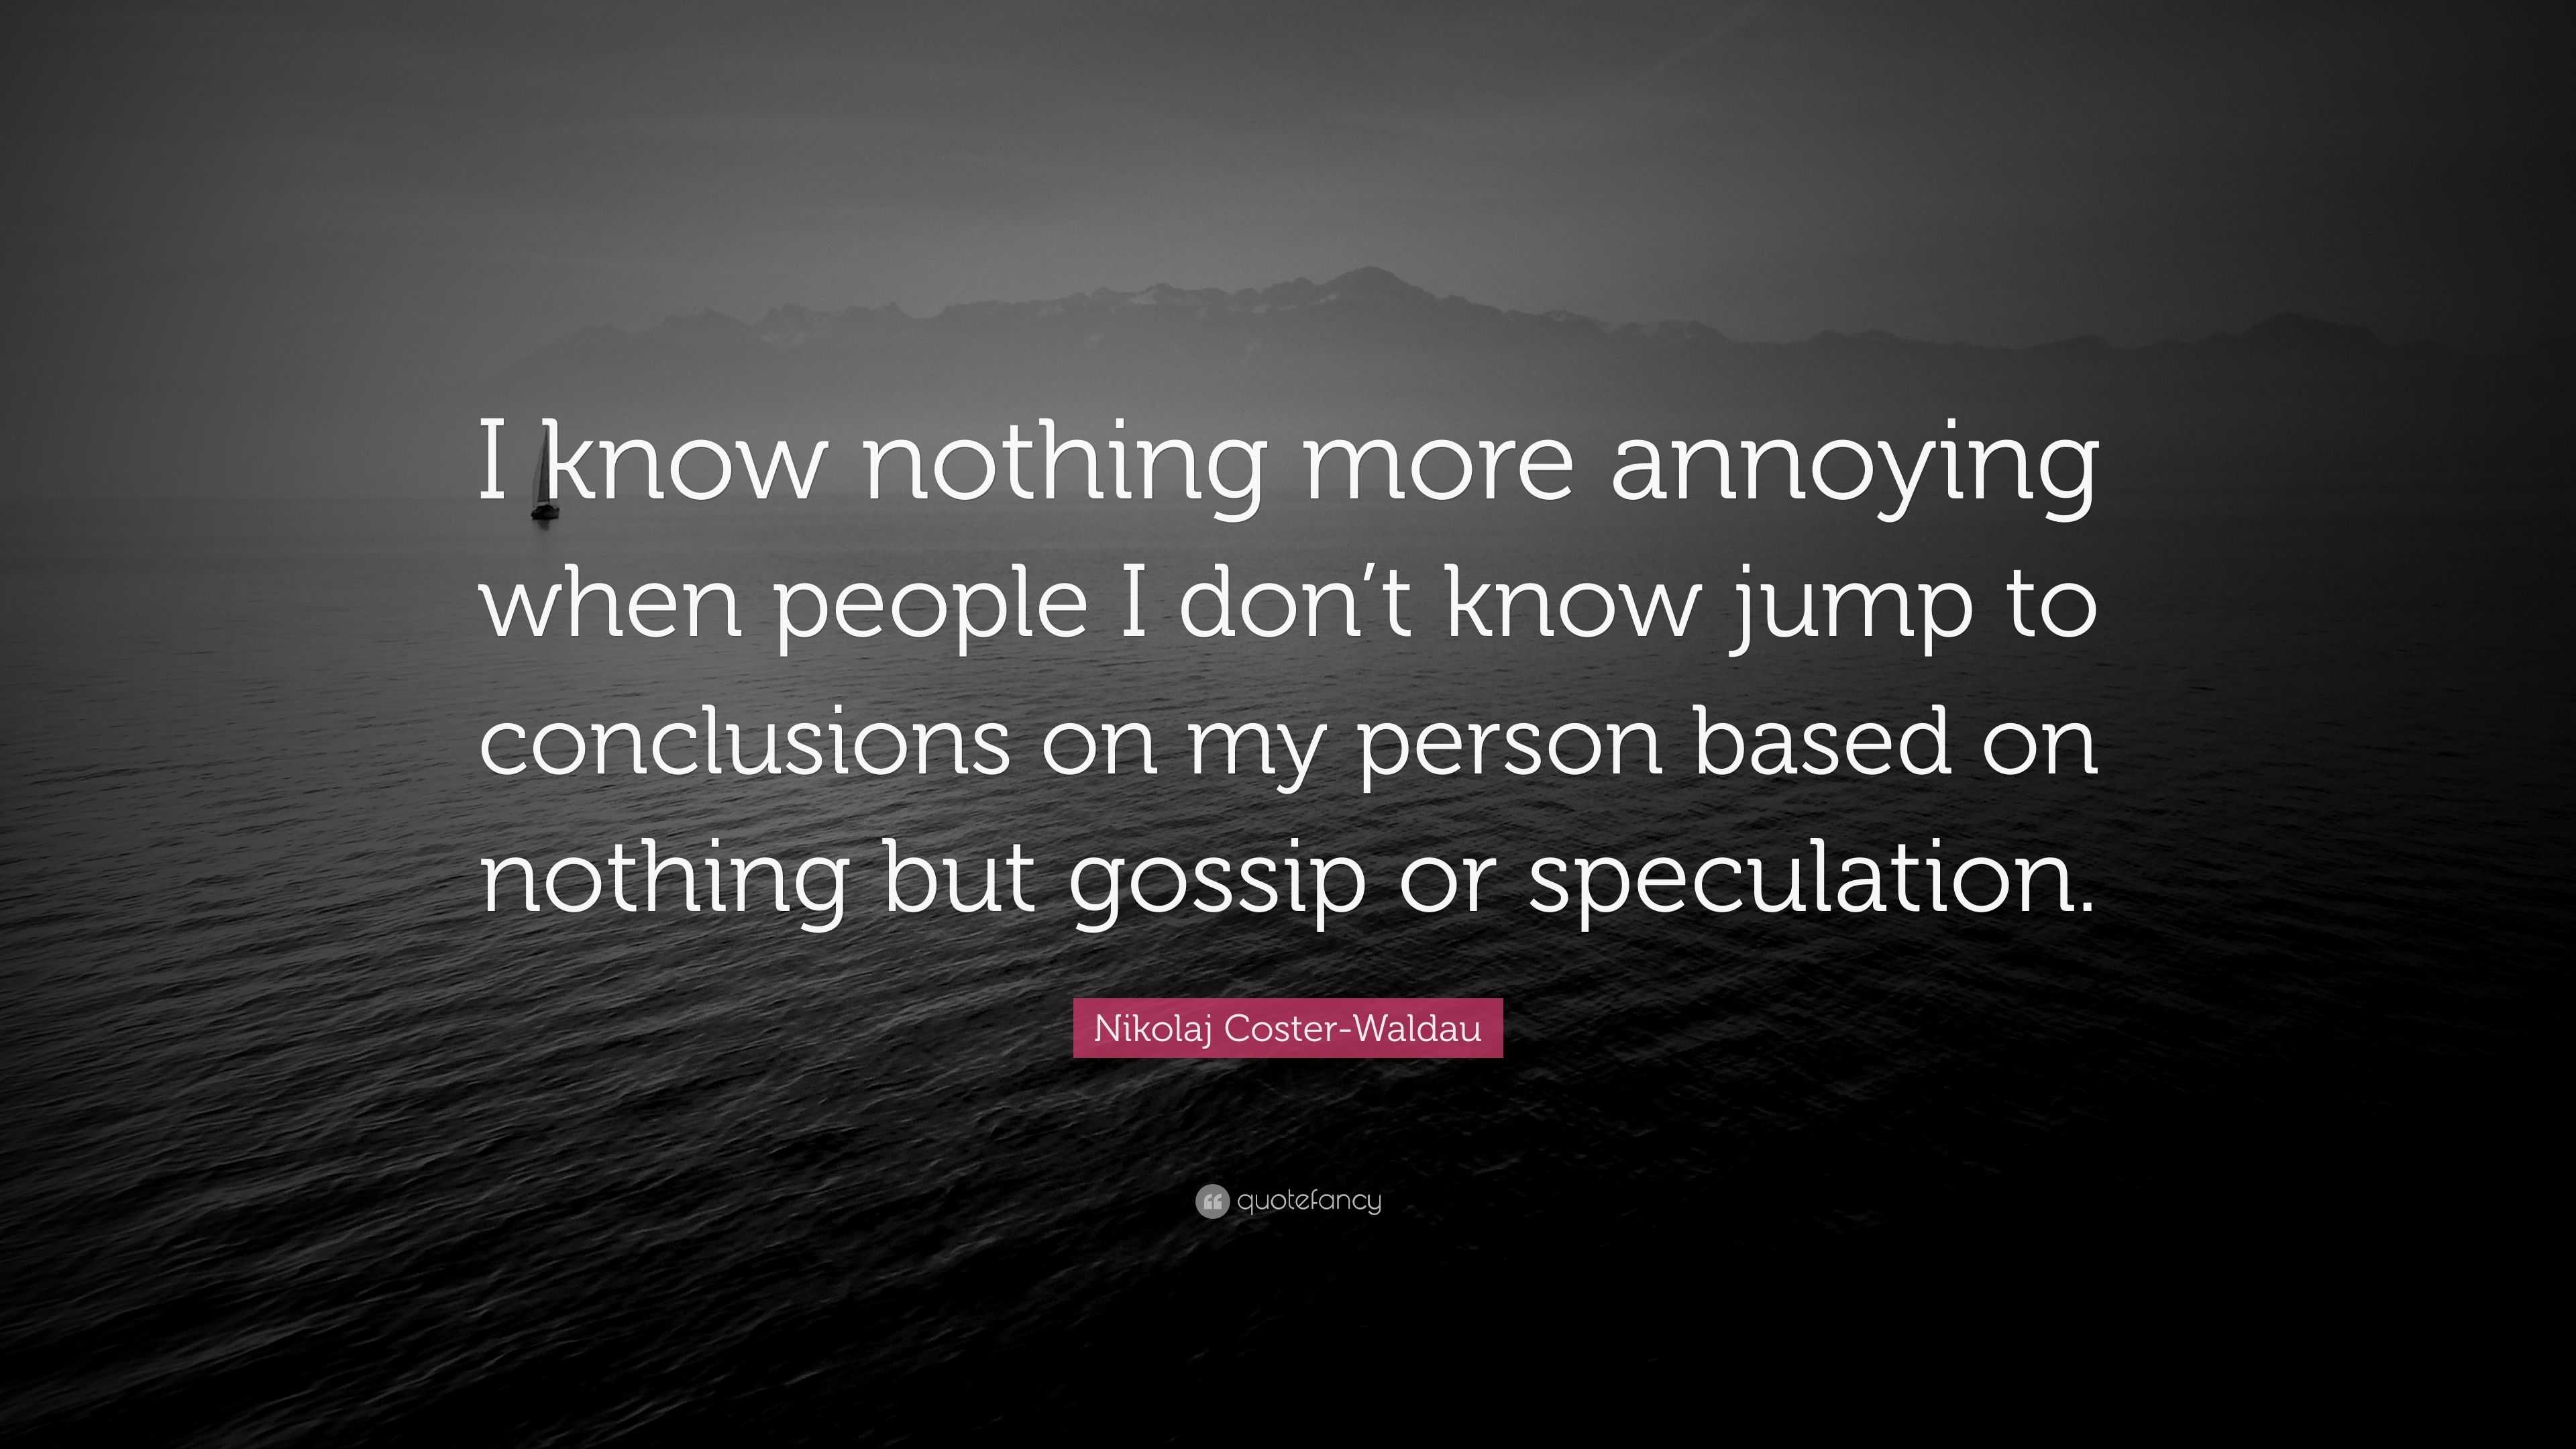 Nikolaj Coster-Waldau Quote: “I know nothing more annoying when people ...